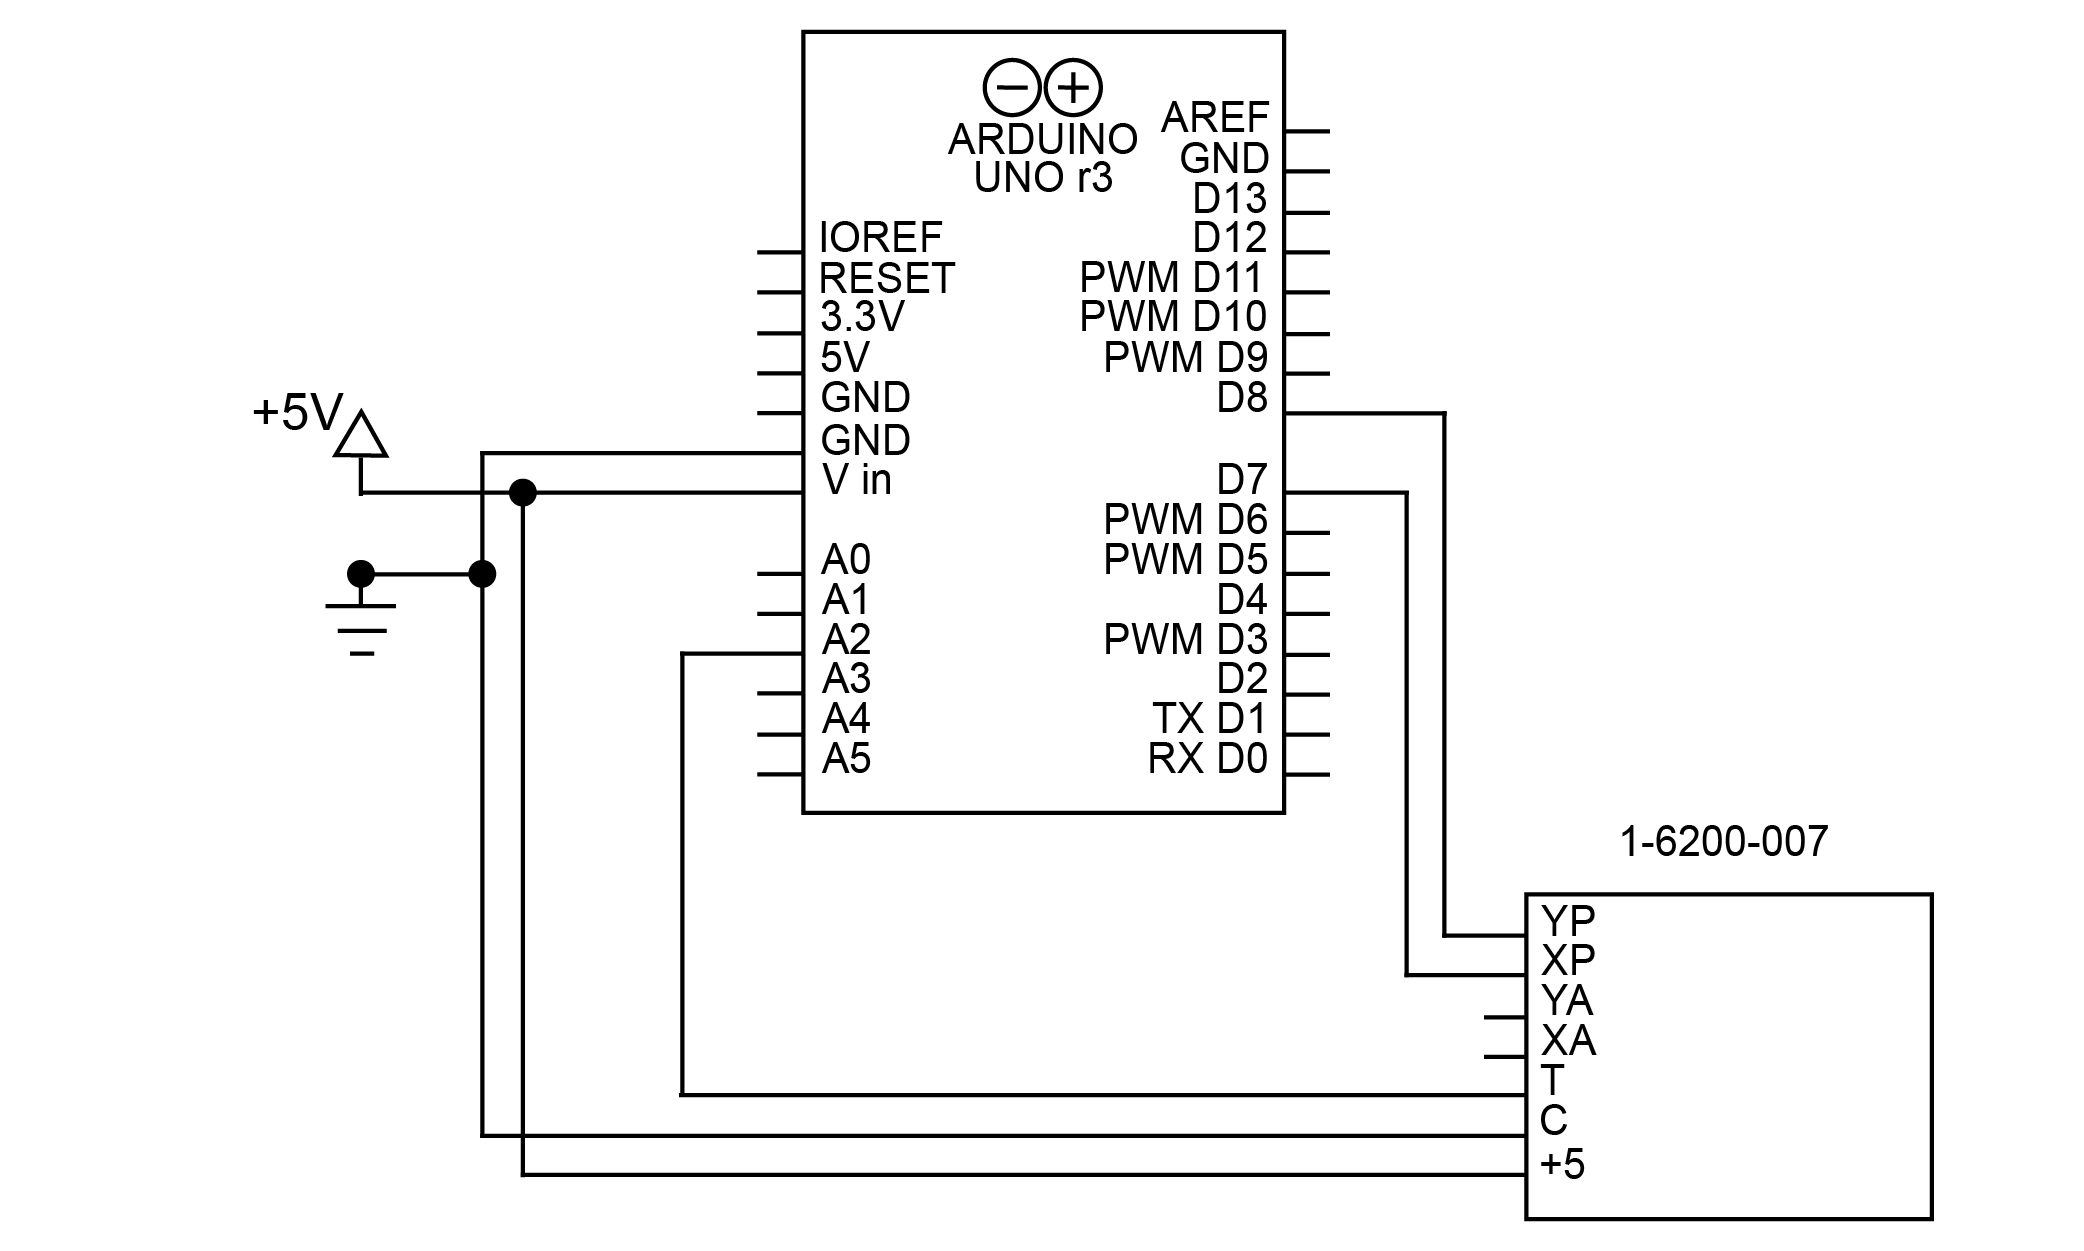 Wiring Schematic for the 1-6200-007 PWM signal conditioners with an Arduino Uno